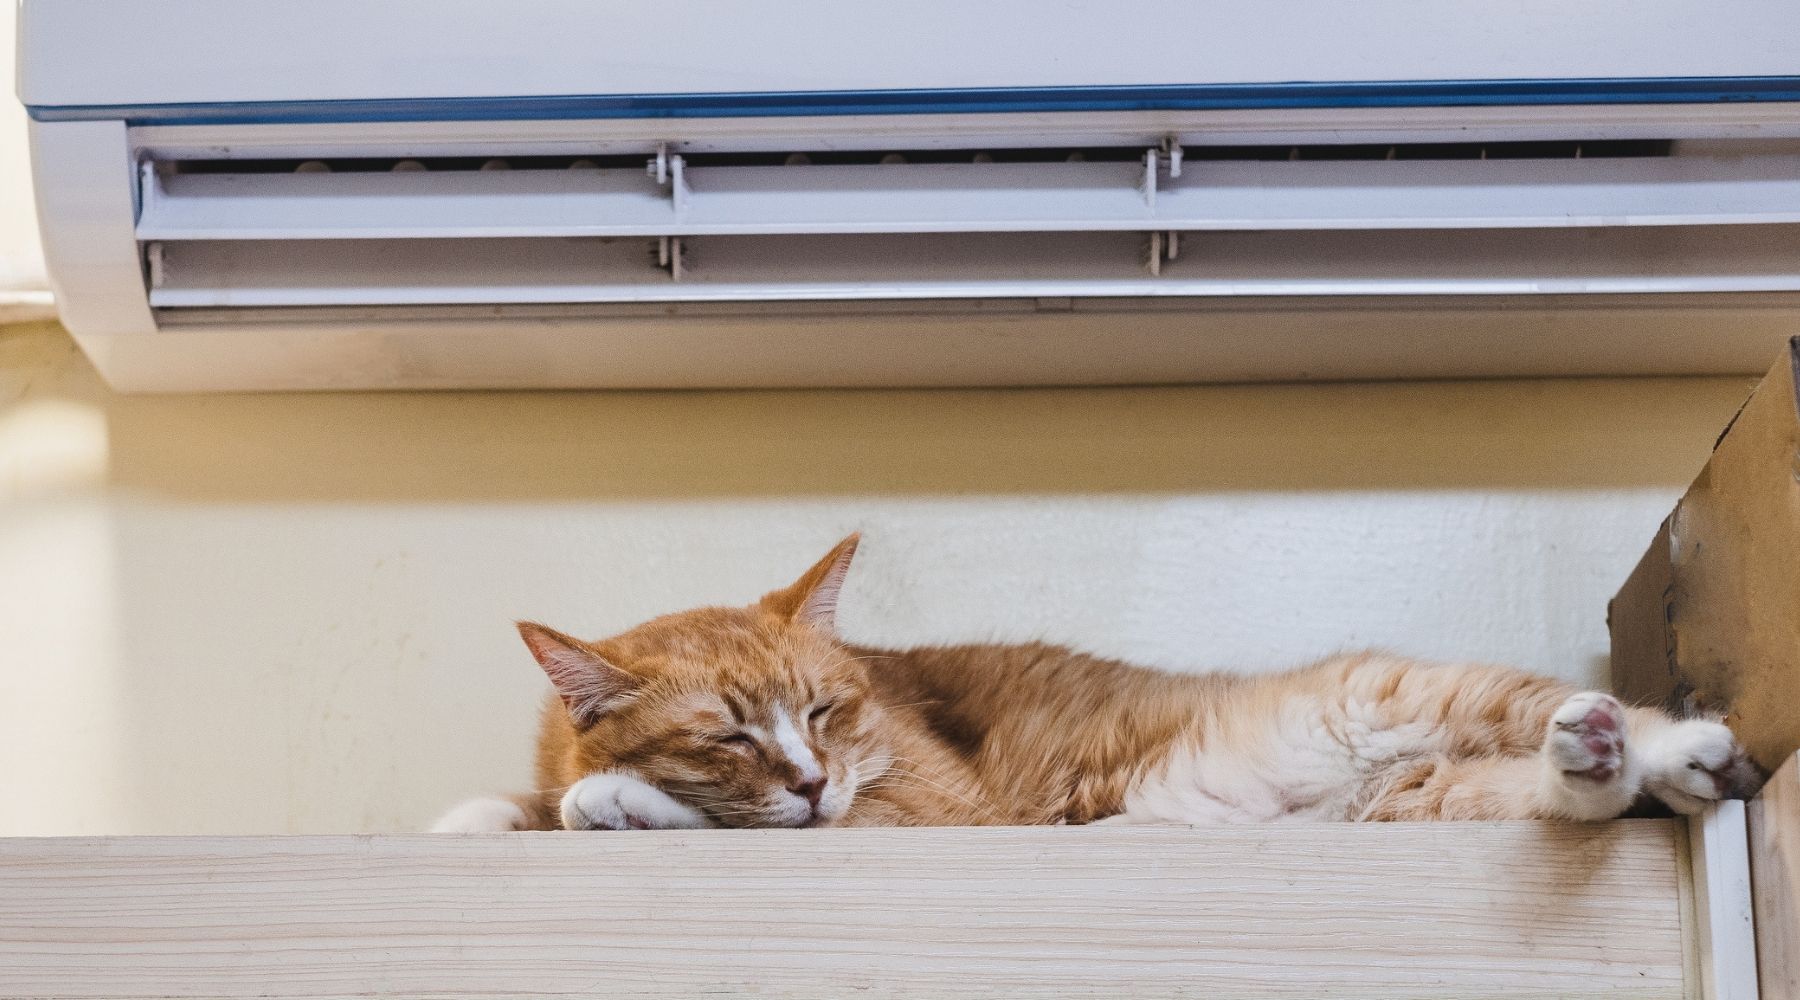 A cat relaxes under a aircon heating unit.